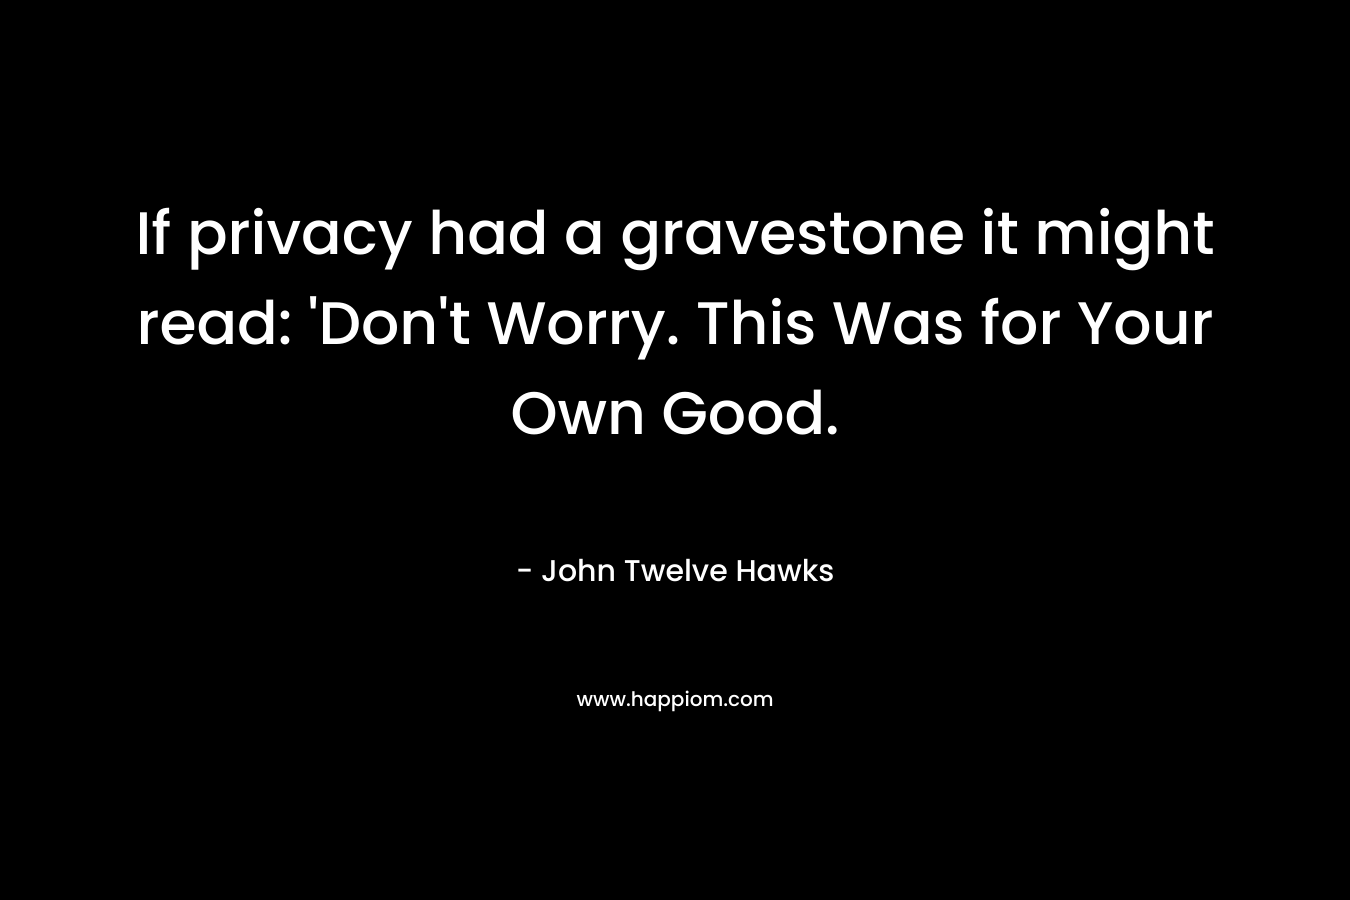 If privacy had a gravestone it might read: 'Don't Worry. This Was for Your Own Good.